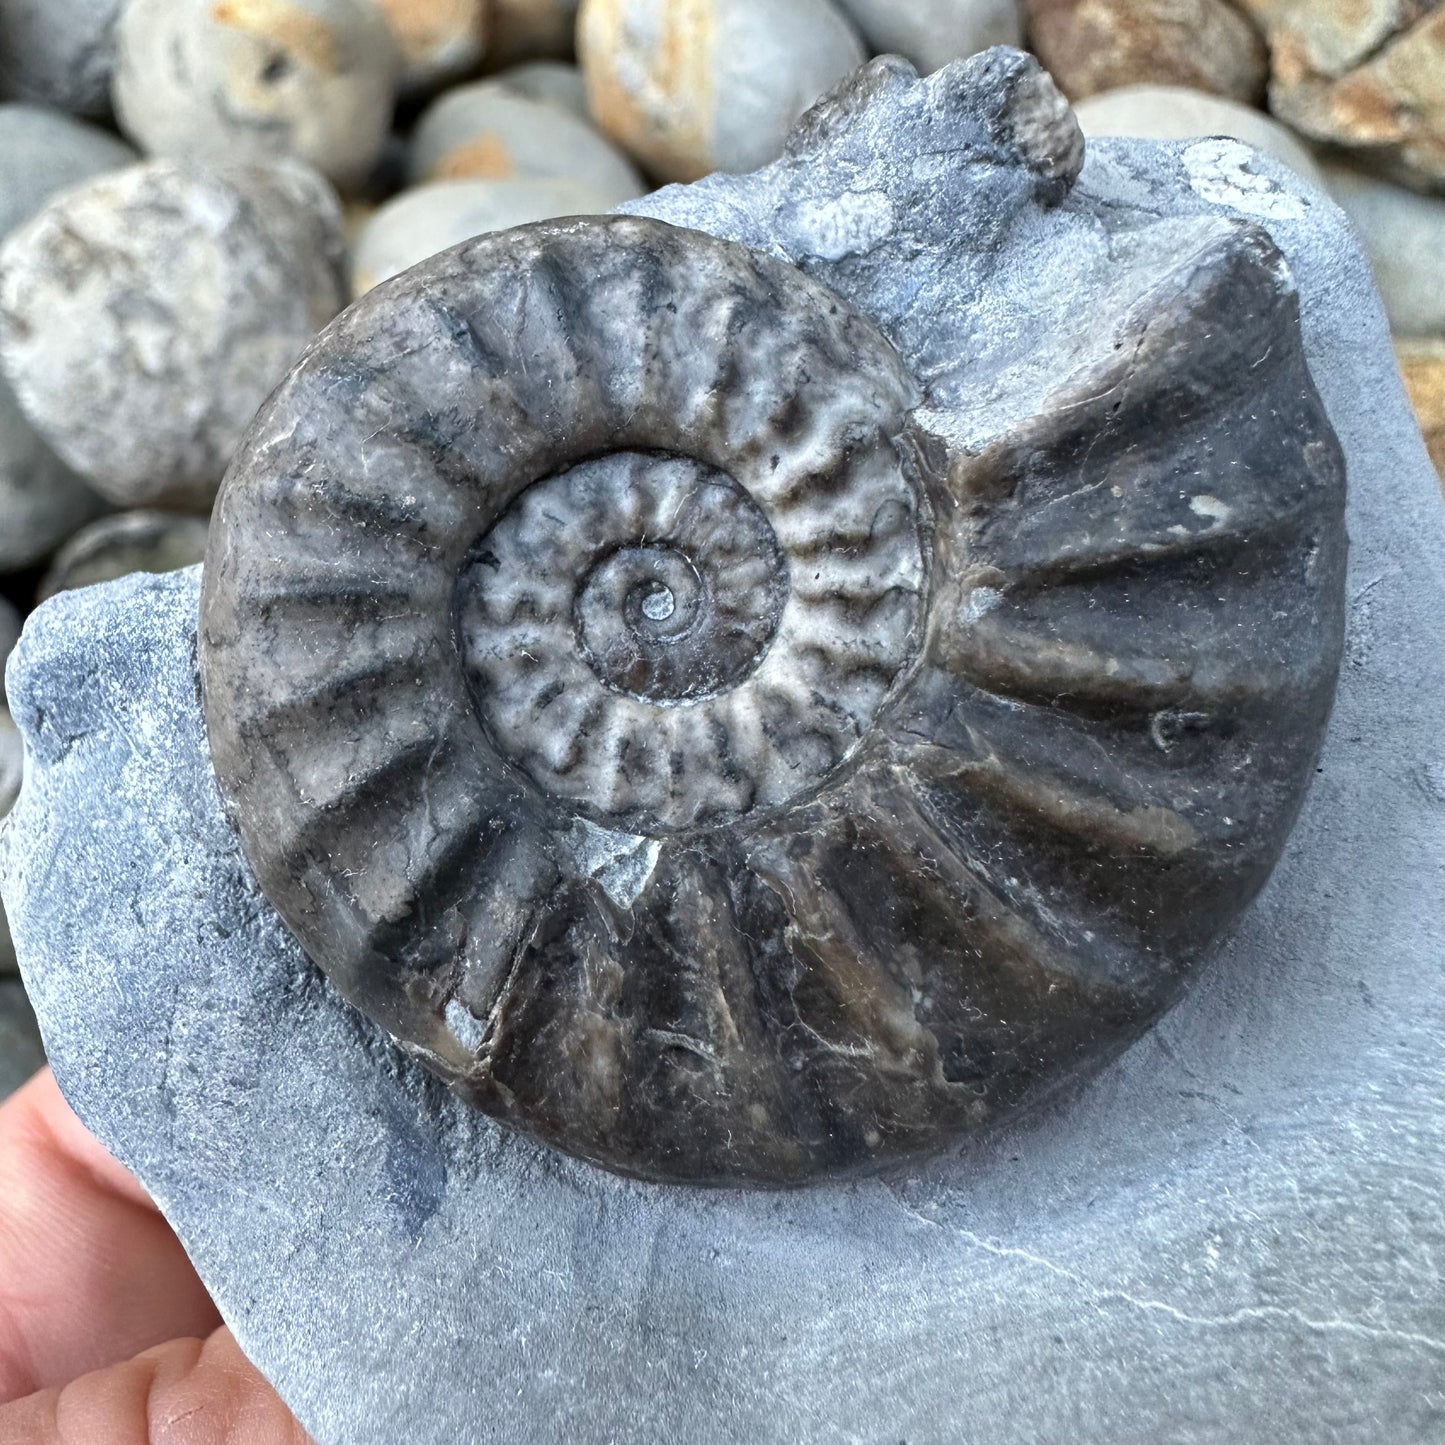 Asteroceras / Promiceras ammonite fossil - Whitby, North Yorkshire